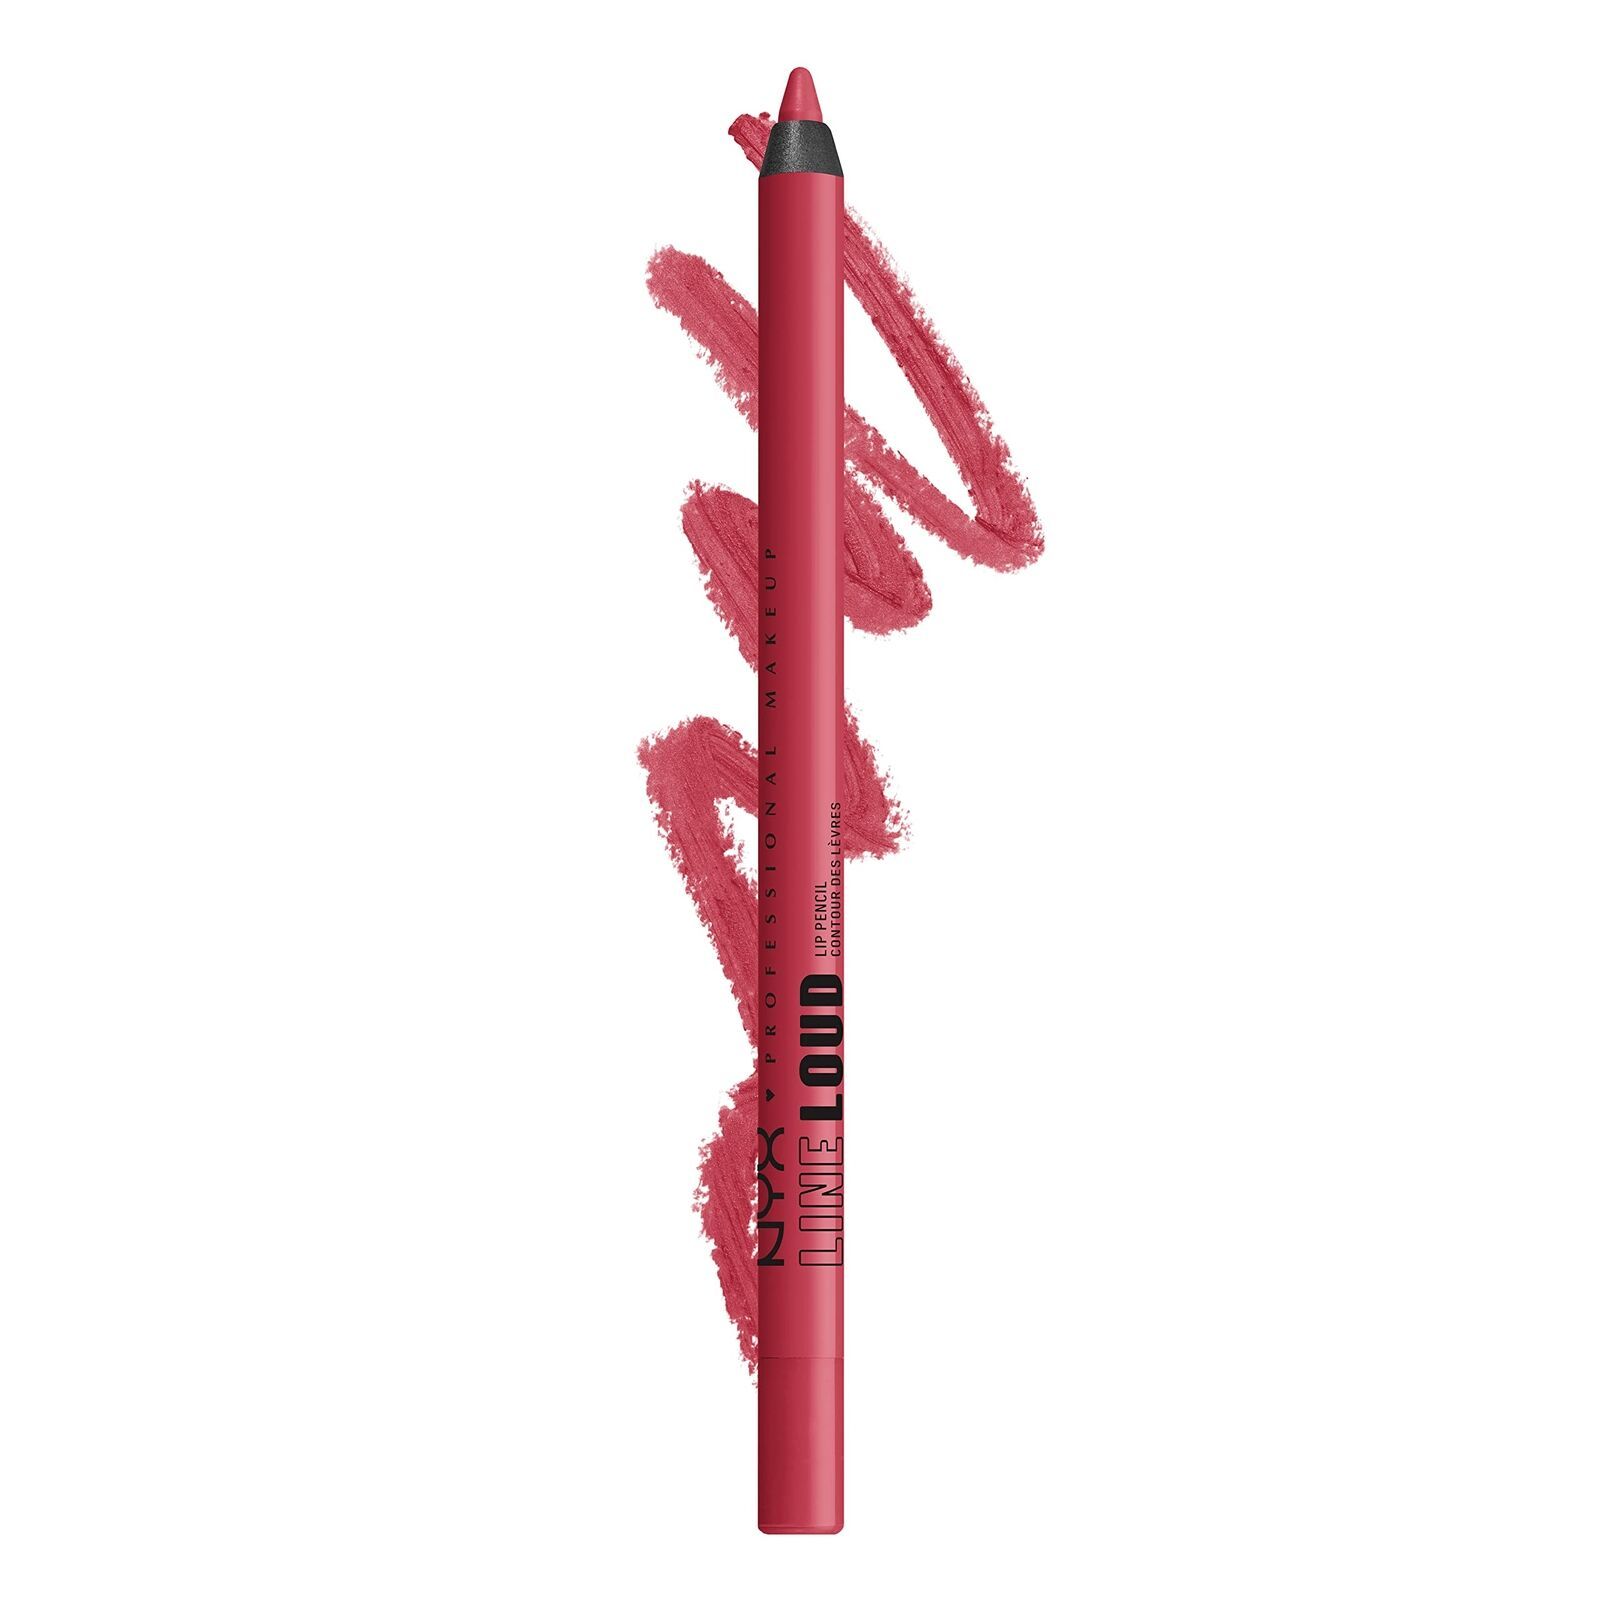 Primary image for NYX PROFESSIONAL MAKEUP Line Loud Lip Liner, Longwear and Pigmented Lip Pencil